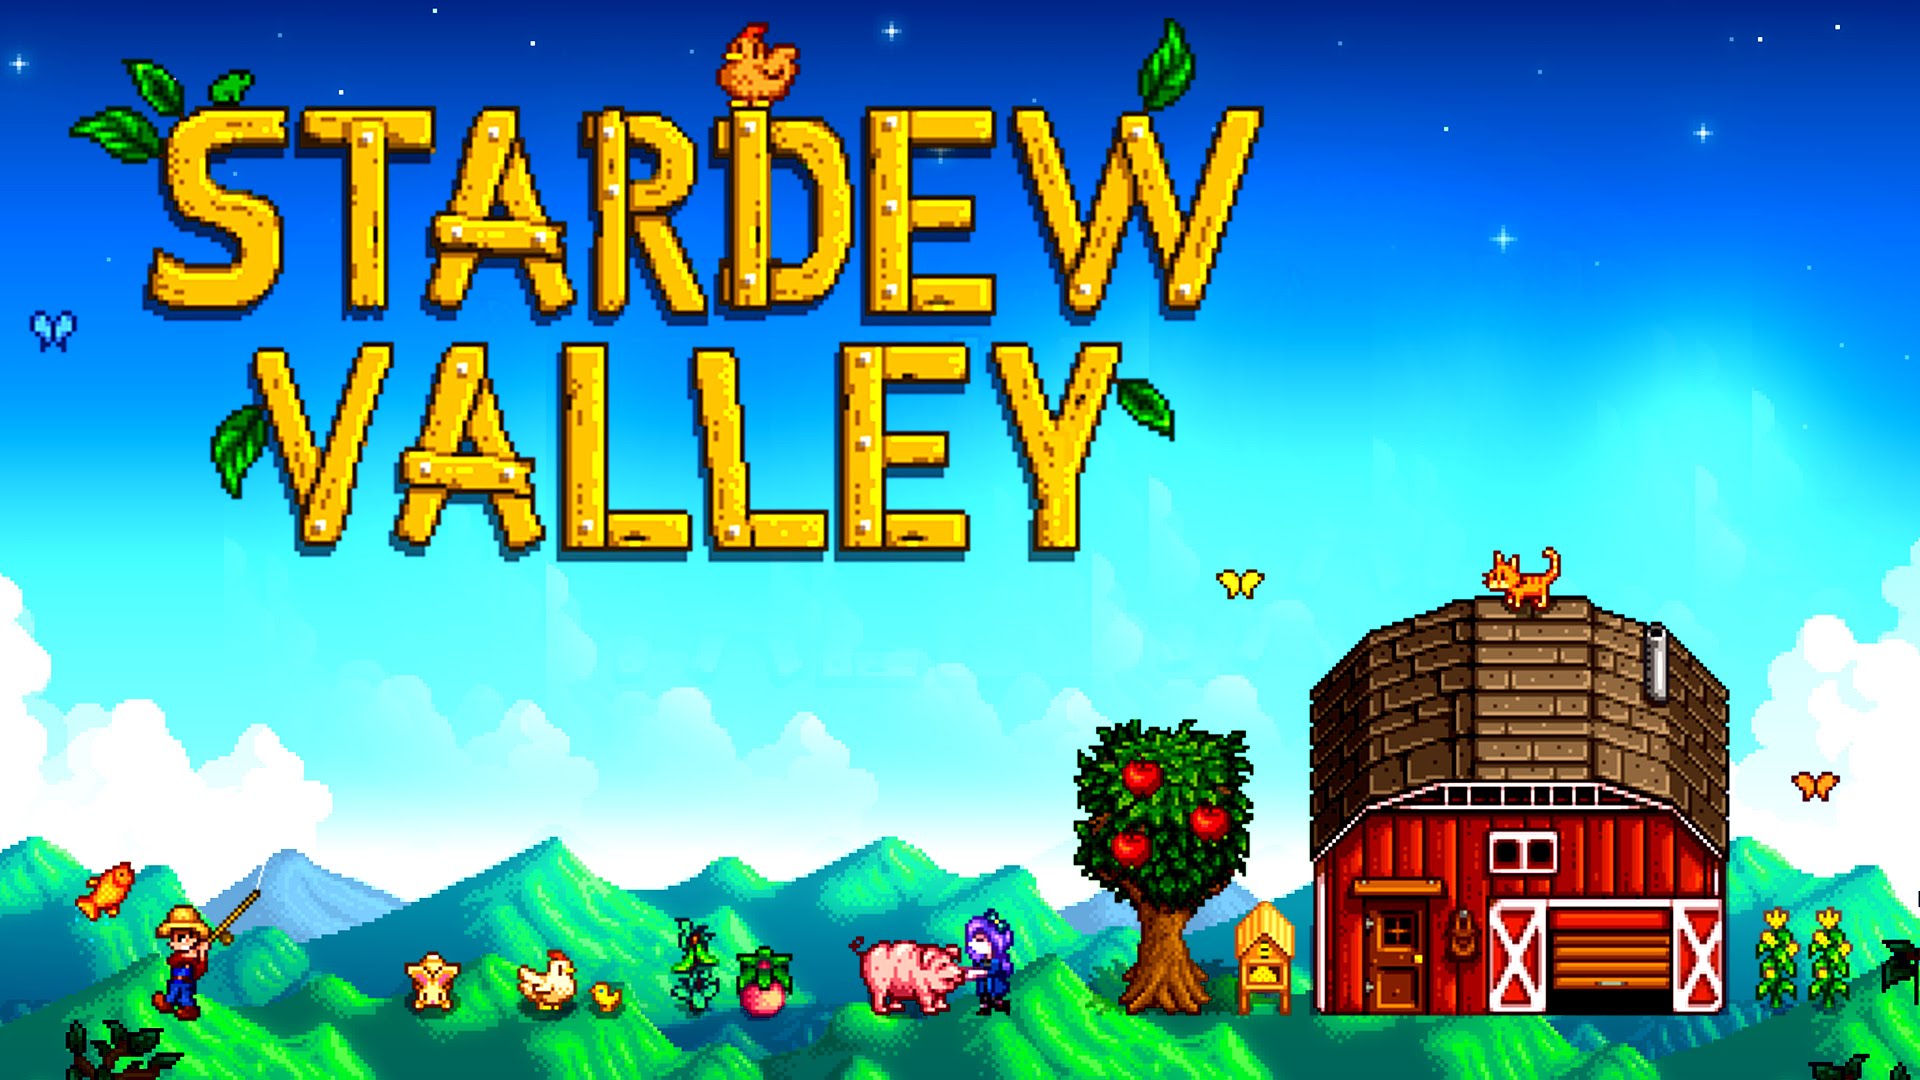 Stardew Valley looks cutesy, but it is so much more than that. 